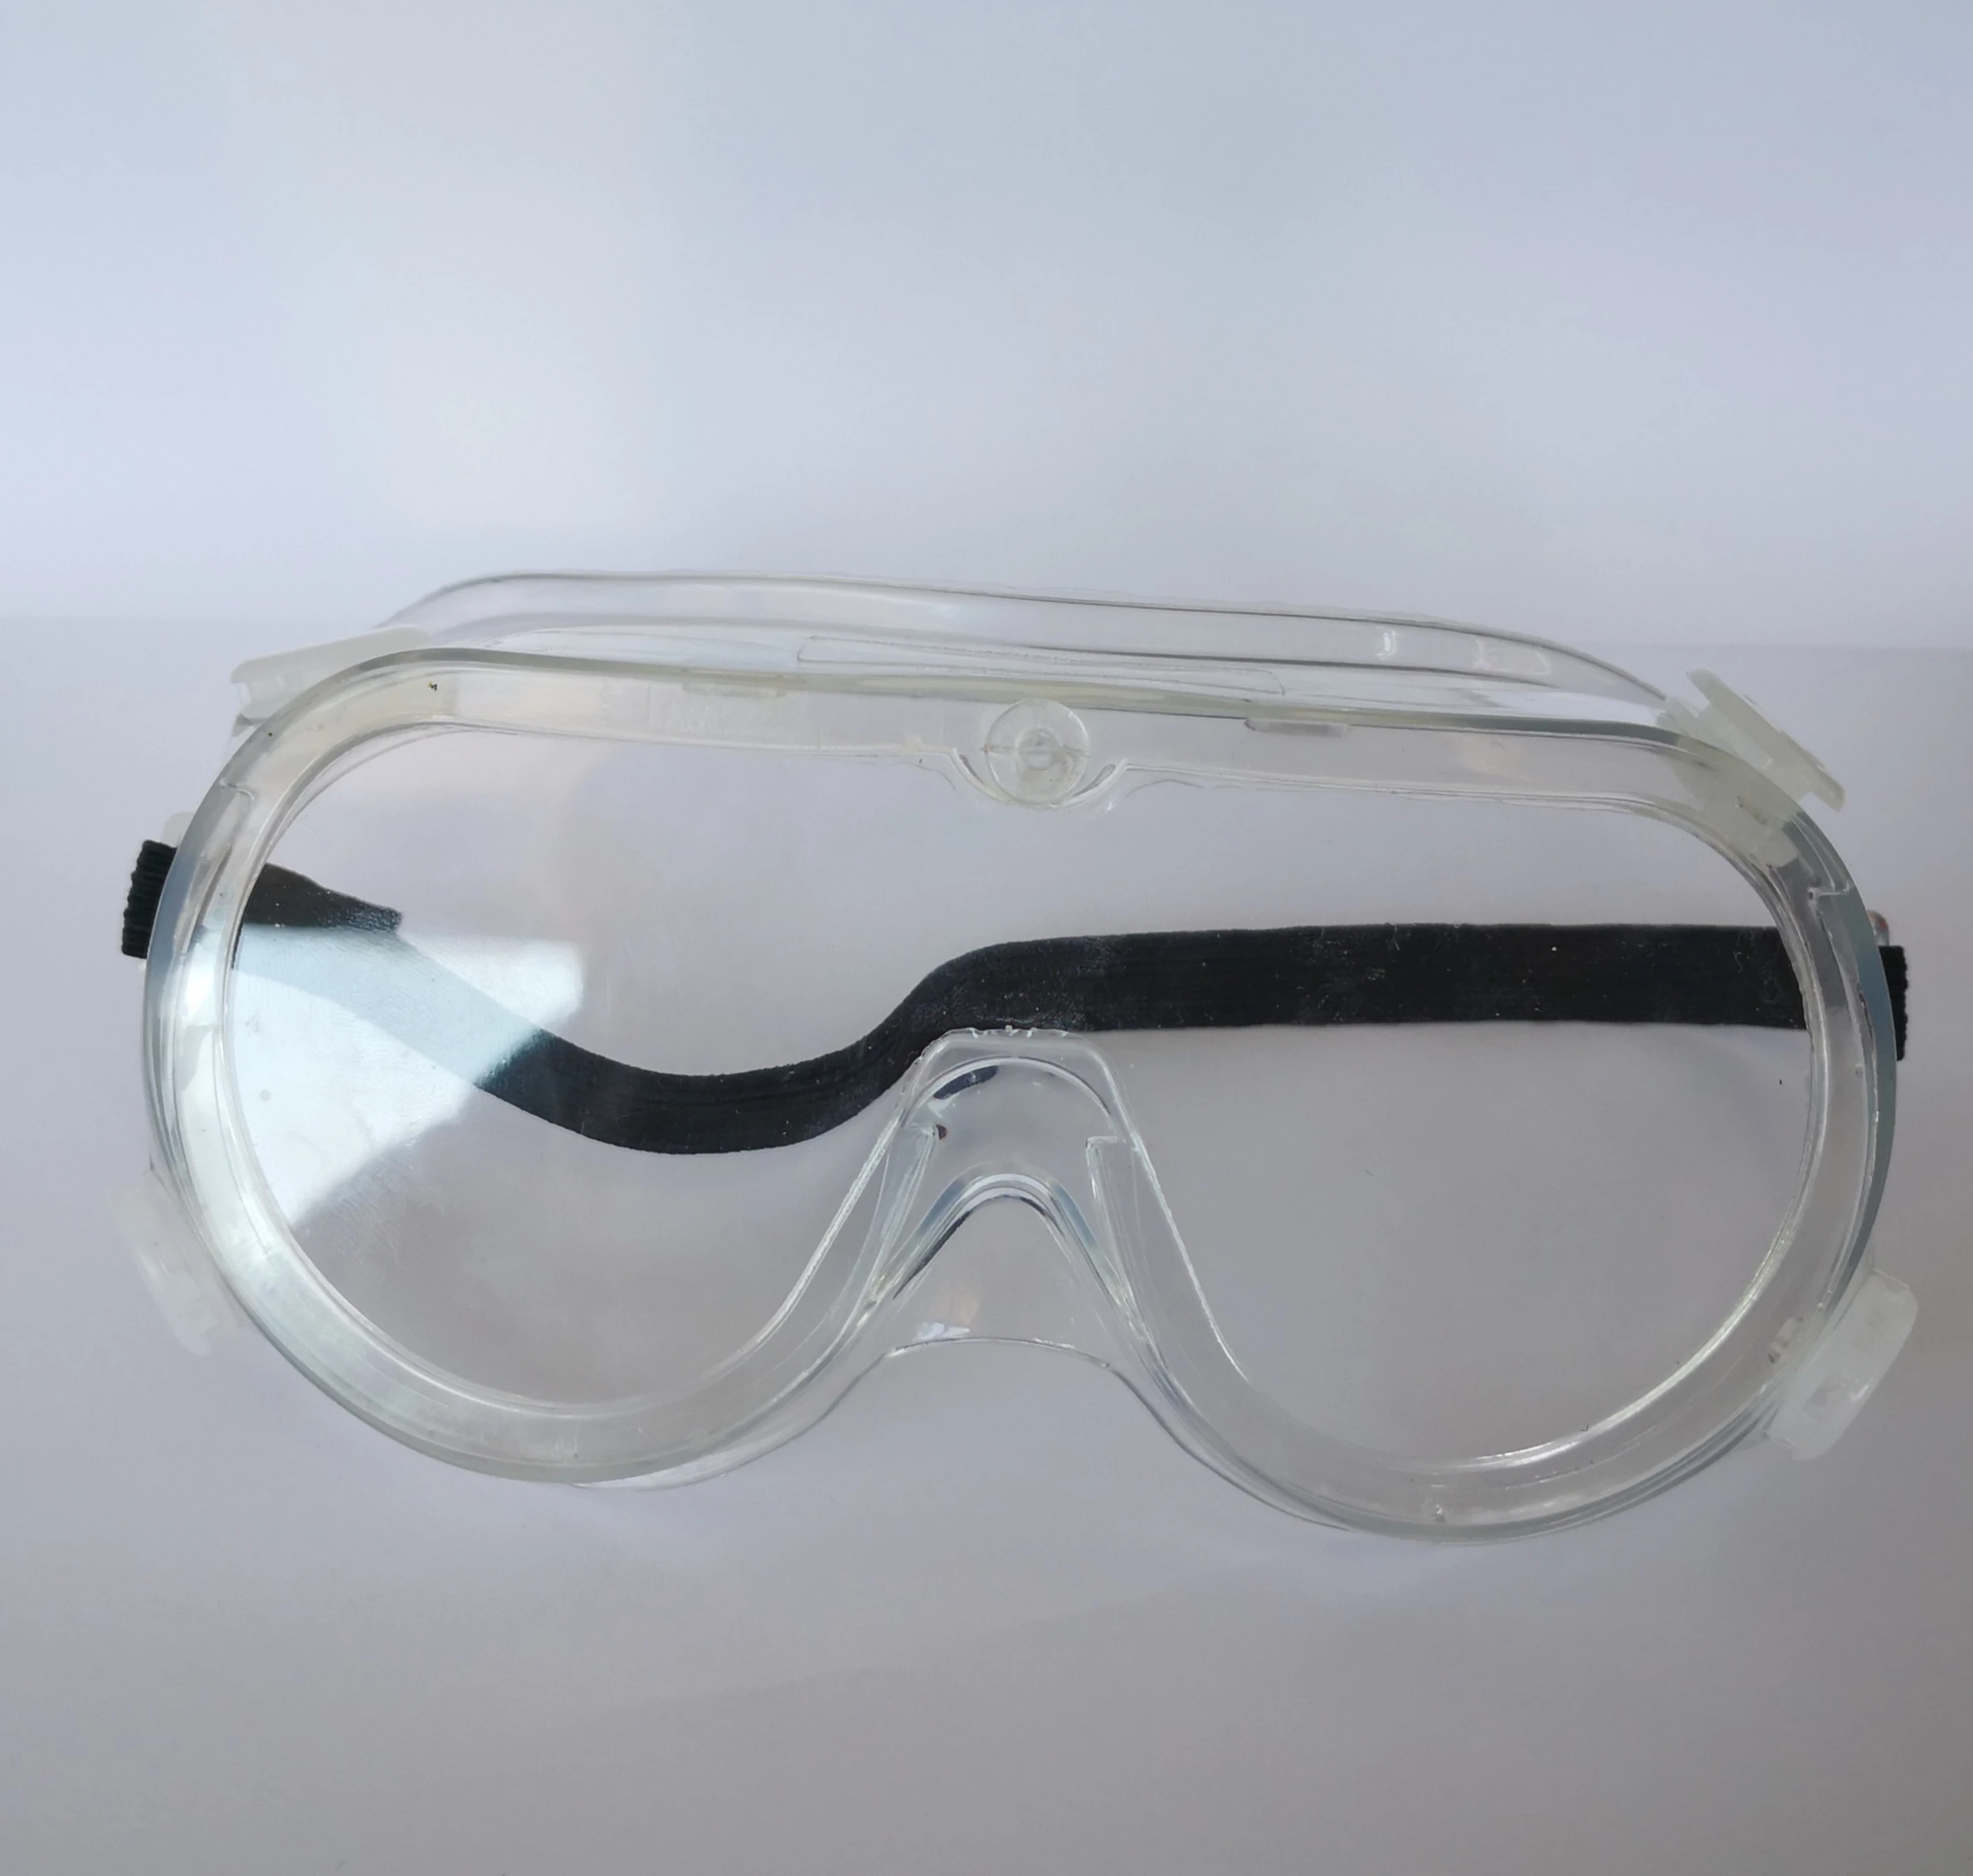 medical safety goggles for eye protection